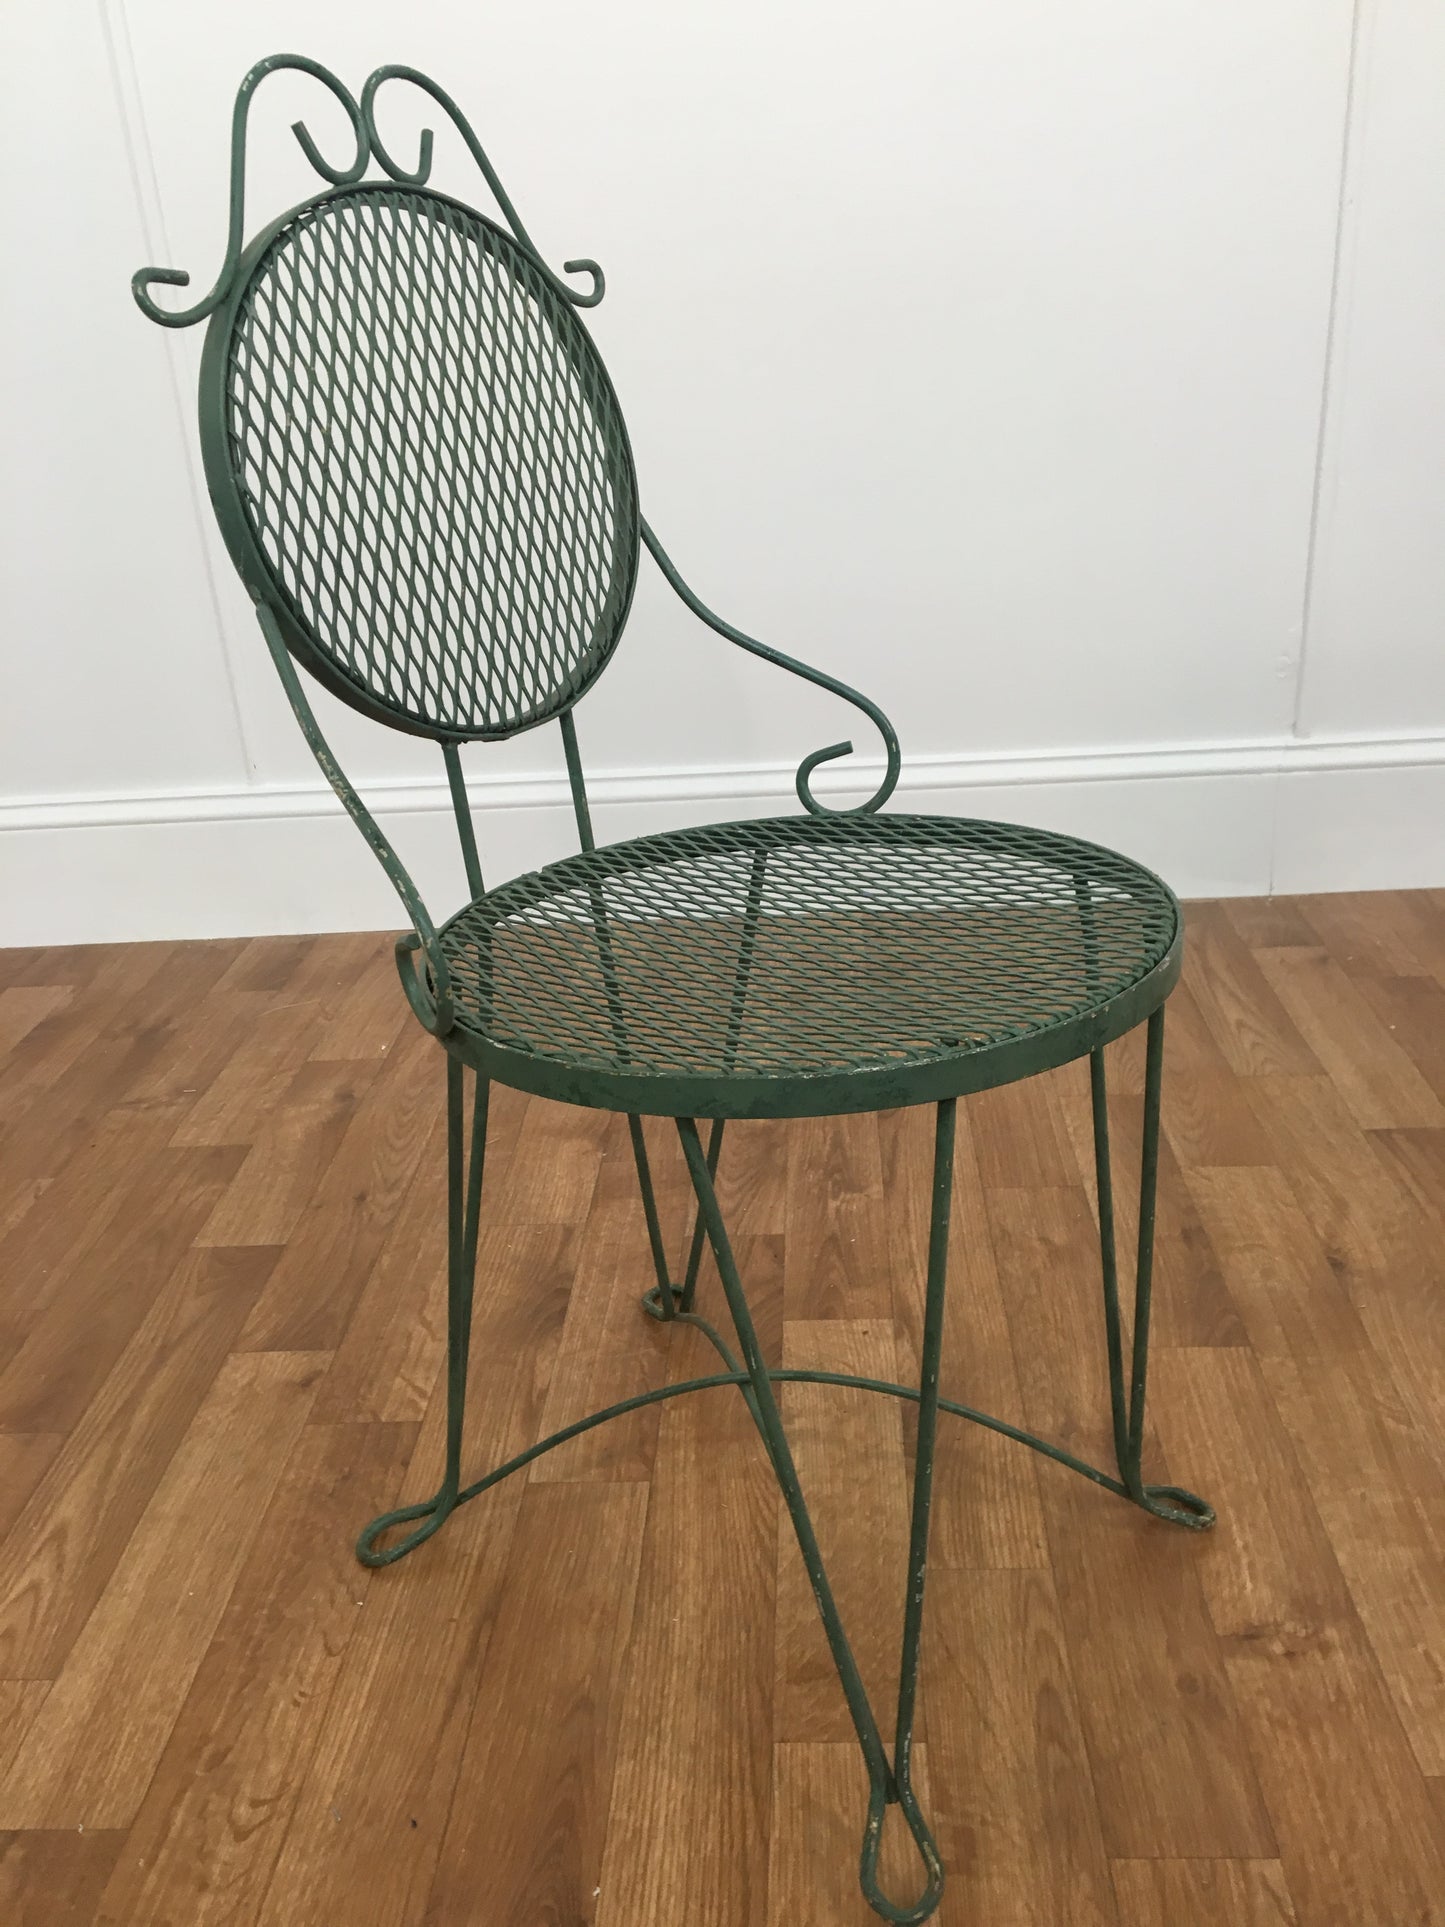 GREEN WROUGHT IRON CAFE CHAIR